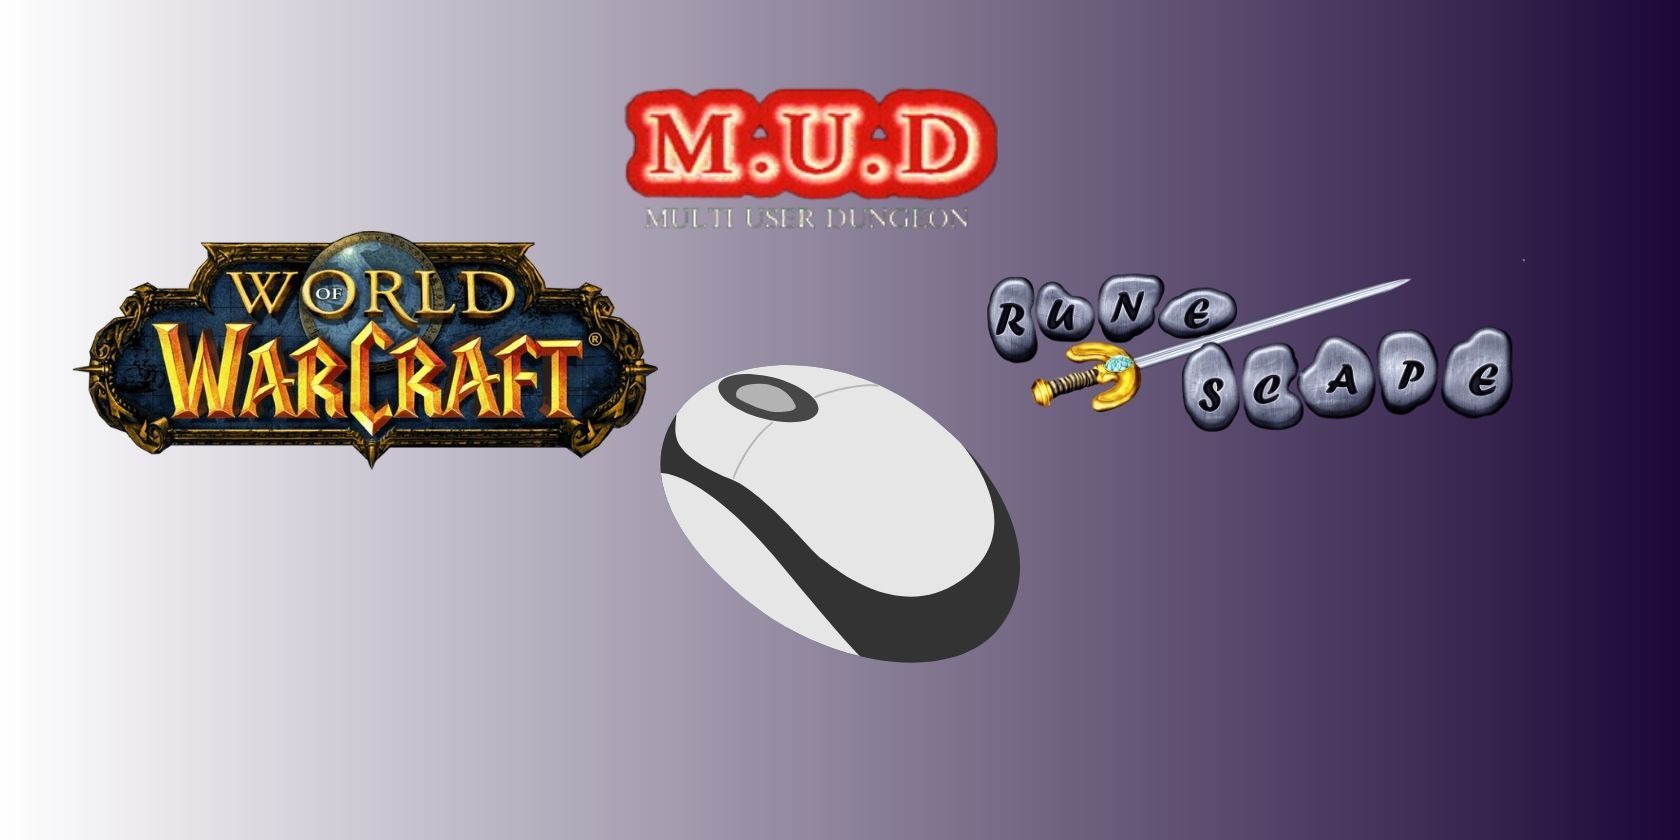 The MUD World of Warcraft and RuneScape logos surrounding a cartoon computer mouse